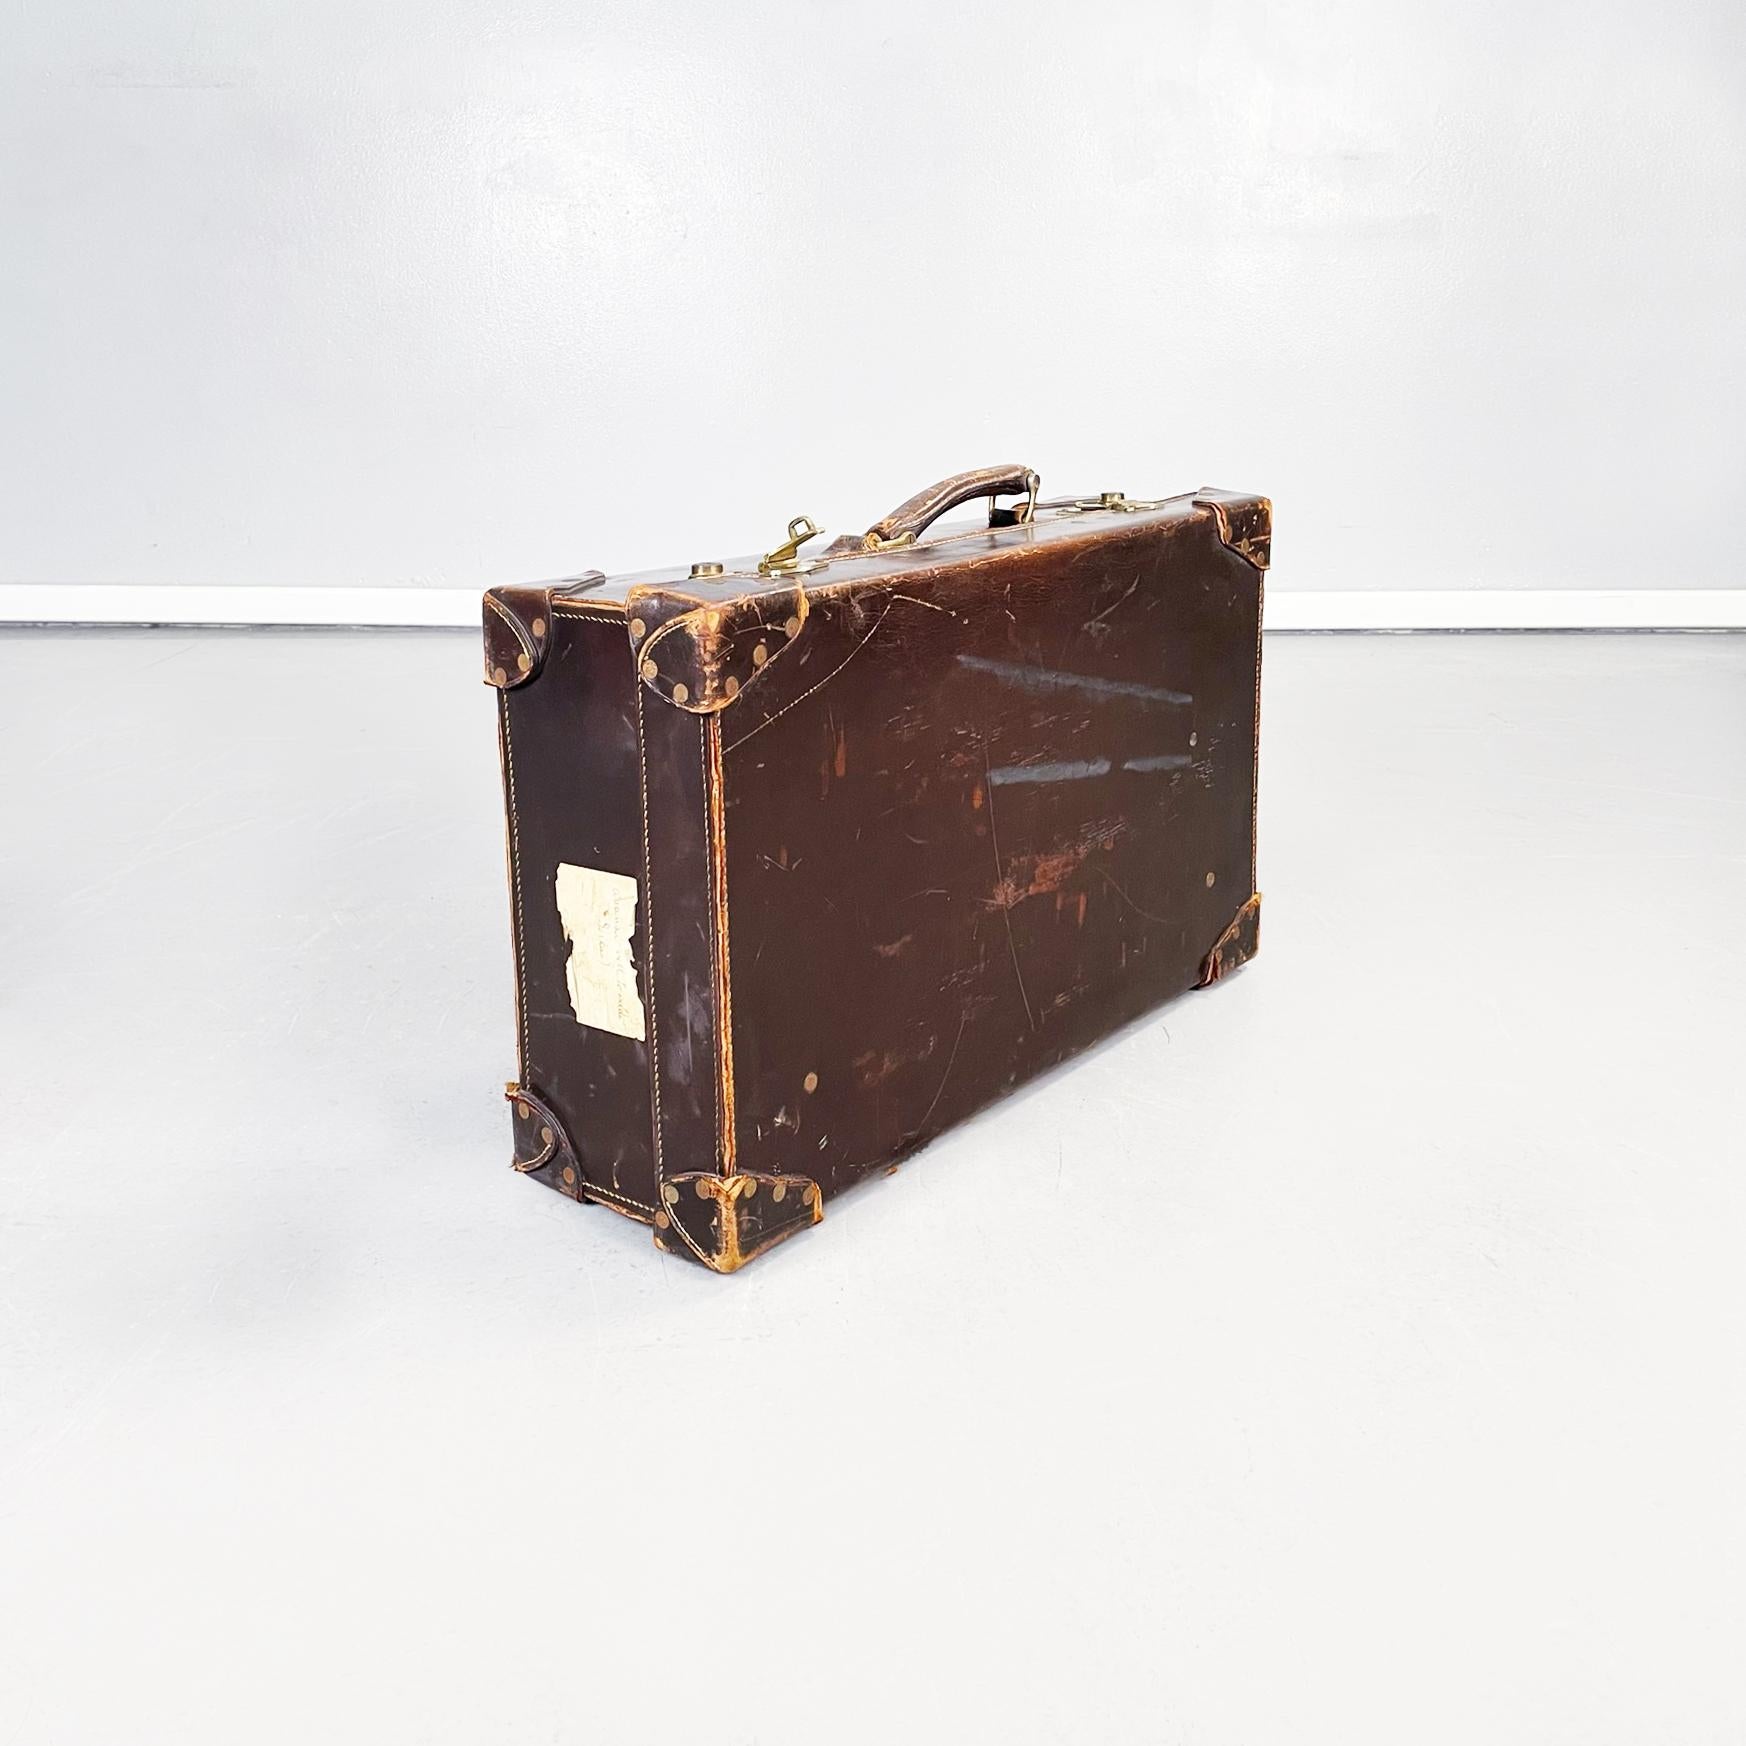 Italian Mid-Century Modern Luggage in brown and green leather, 1970s
Rectangular suitcase in brown leather. Brass closure, handle present. Forest green leather interior with a pocket and thin brown leather straps. Can be used as a container at